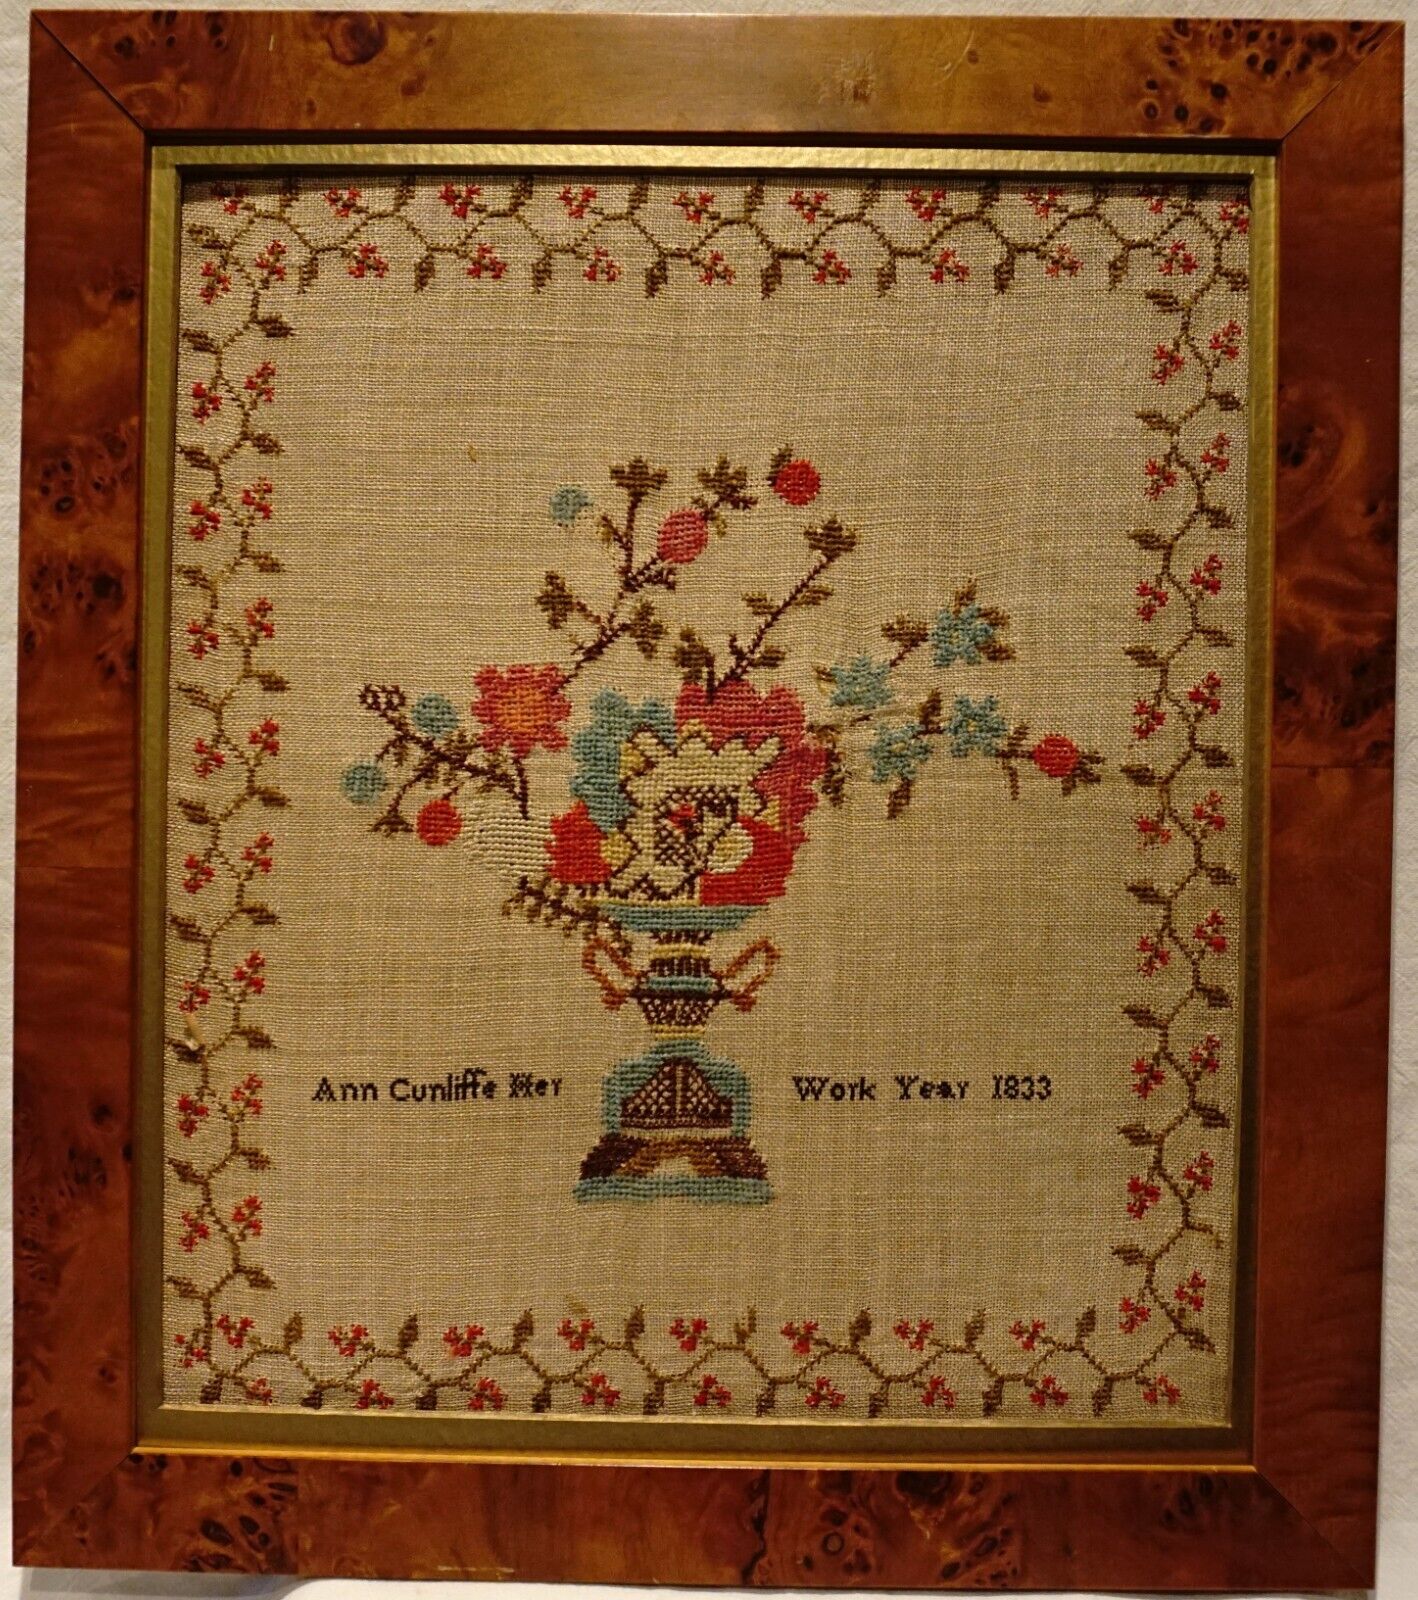 EARLY 19TH CENTURY FLORAL URN SAMPLER BY ANN CUNLIFFE - 1833